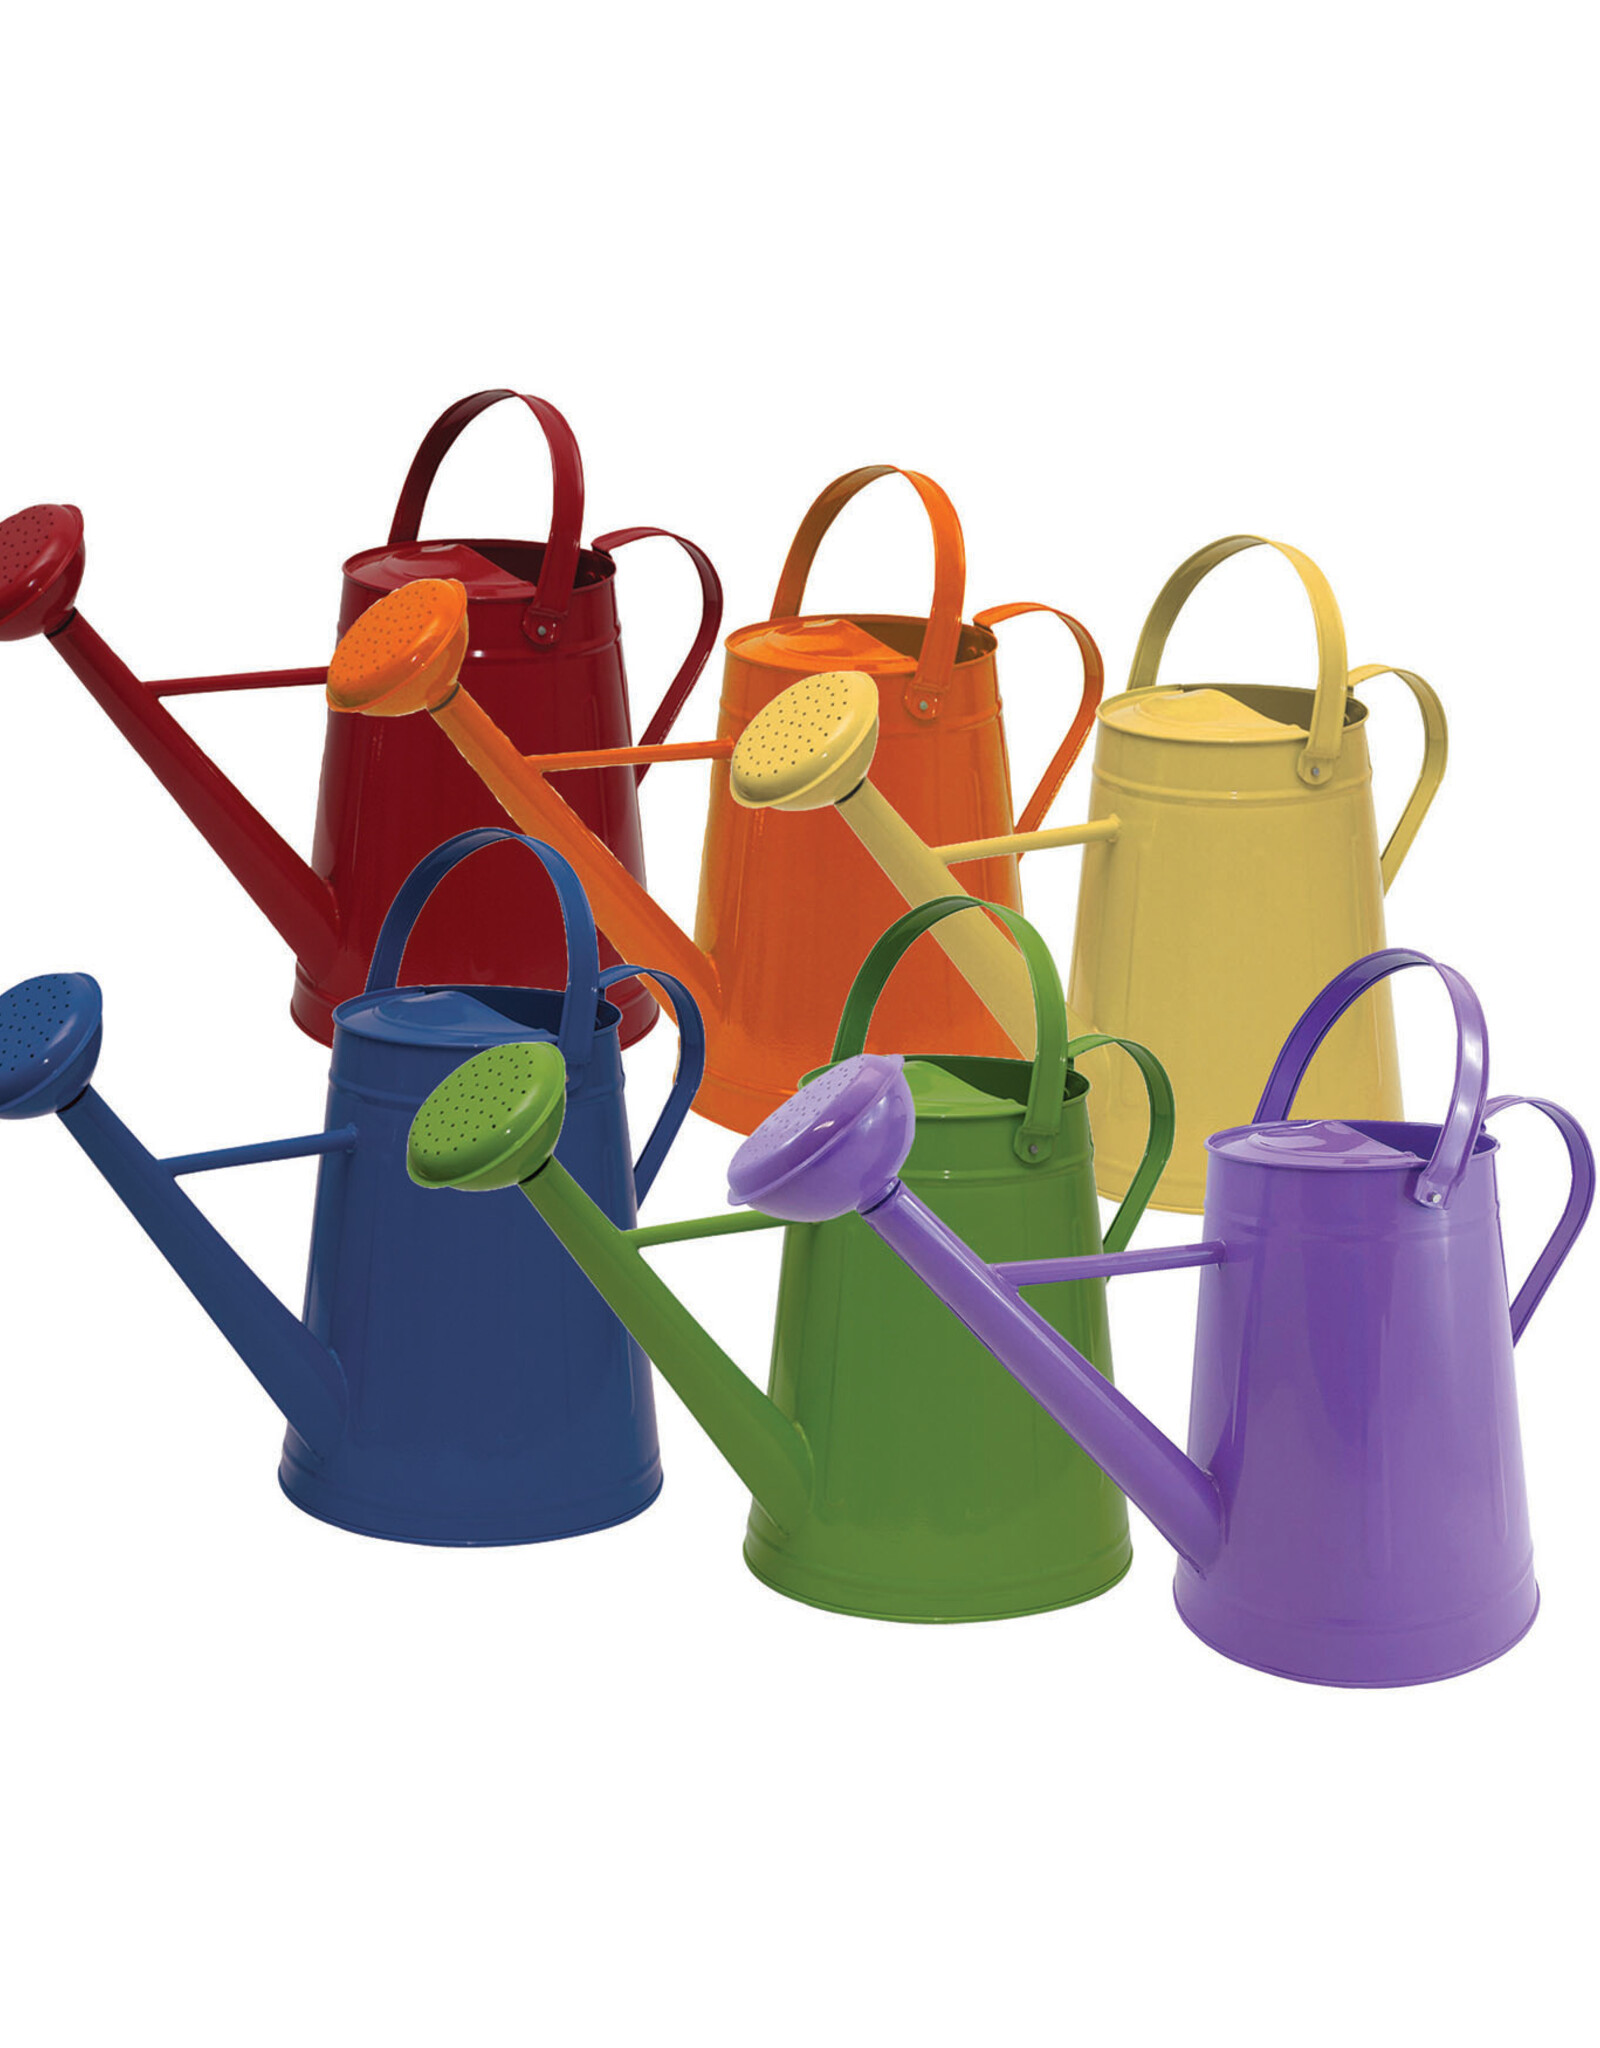 1.2 gal - Mixed Case Metal Watering Can